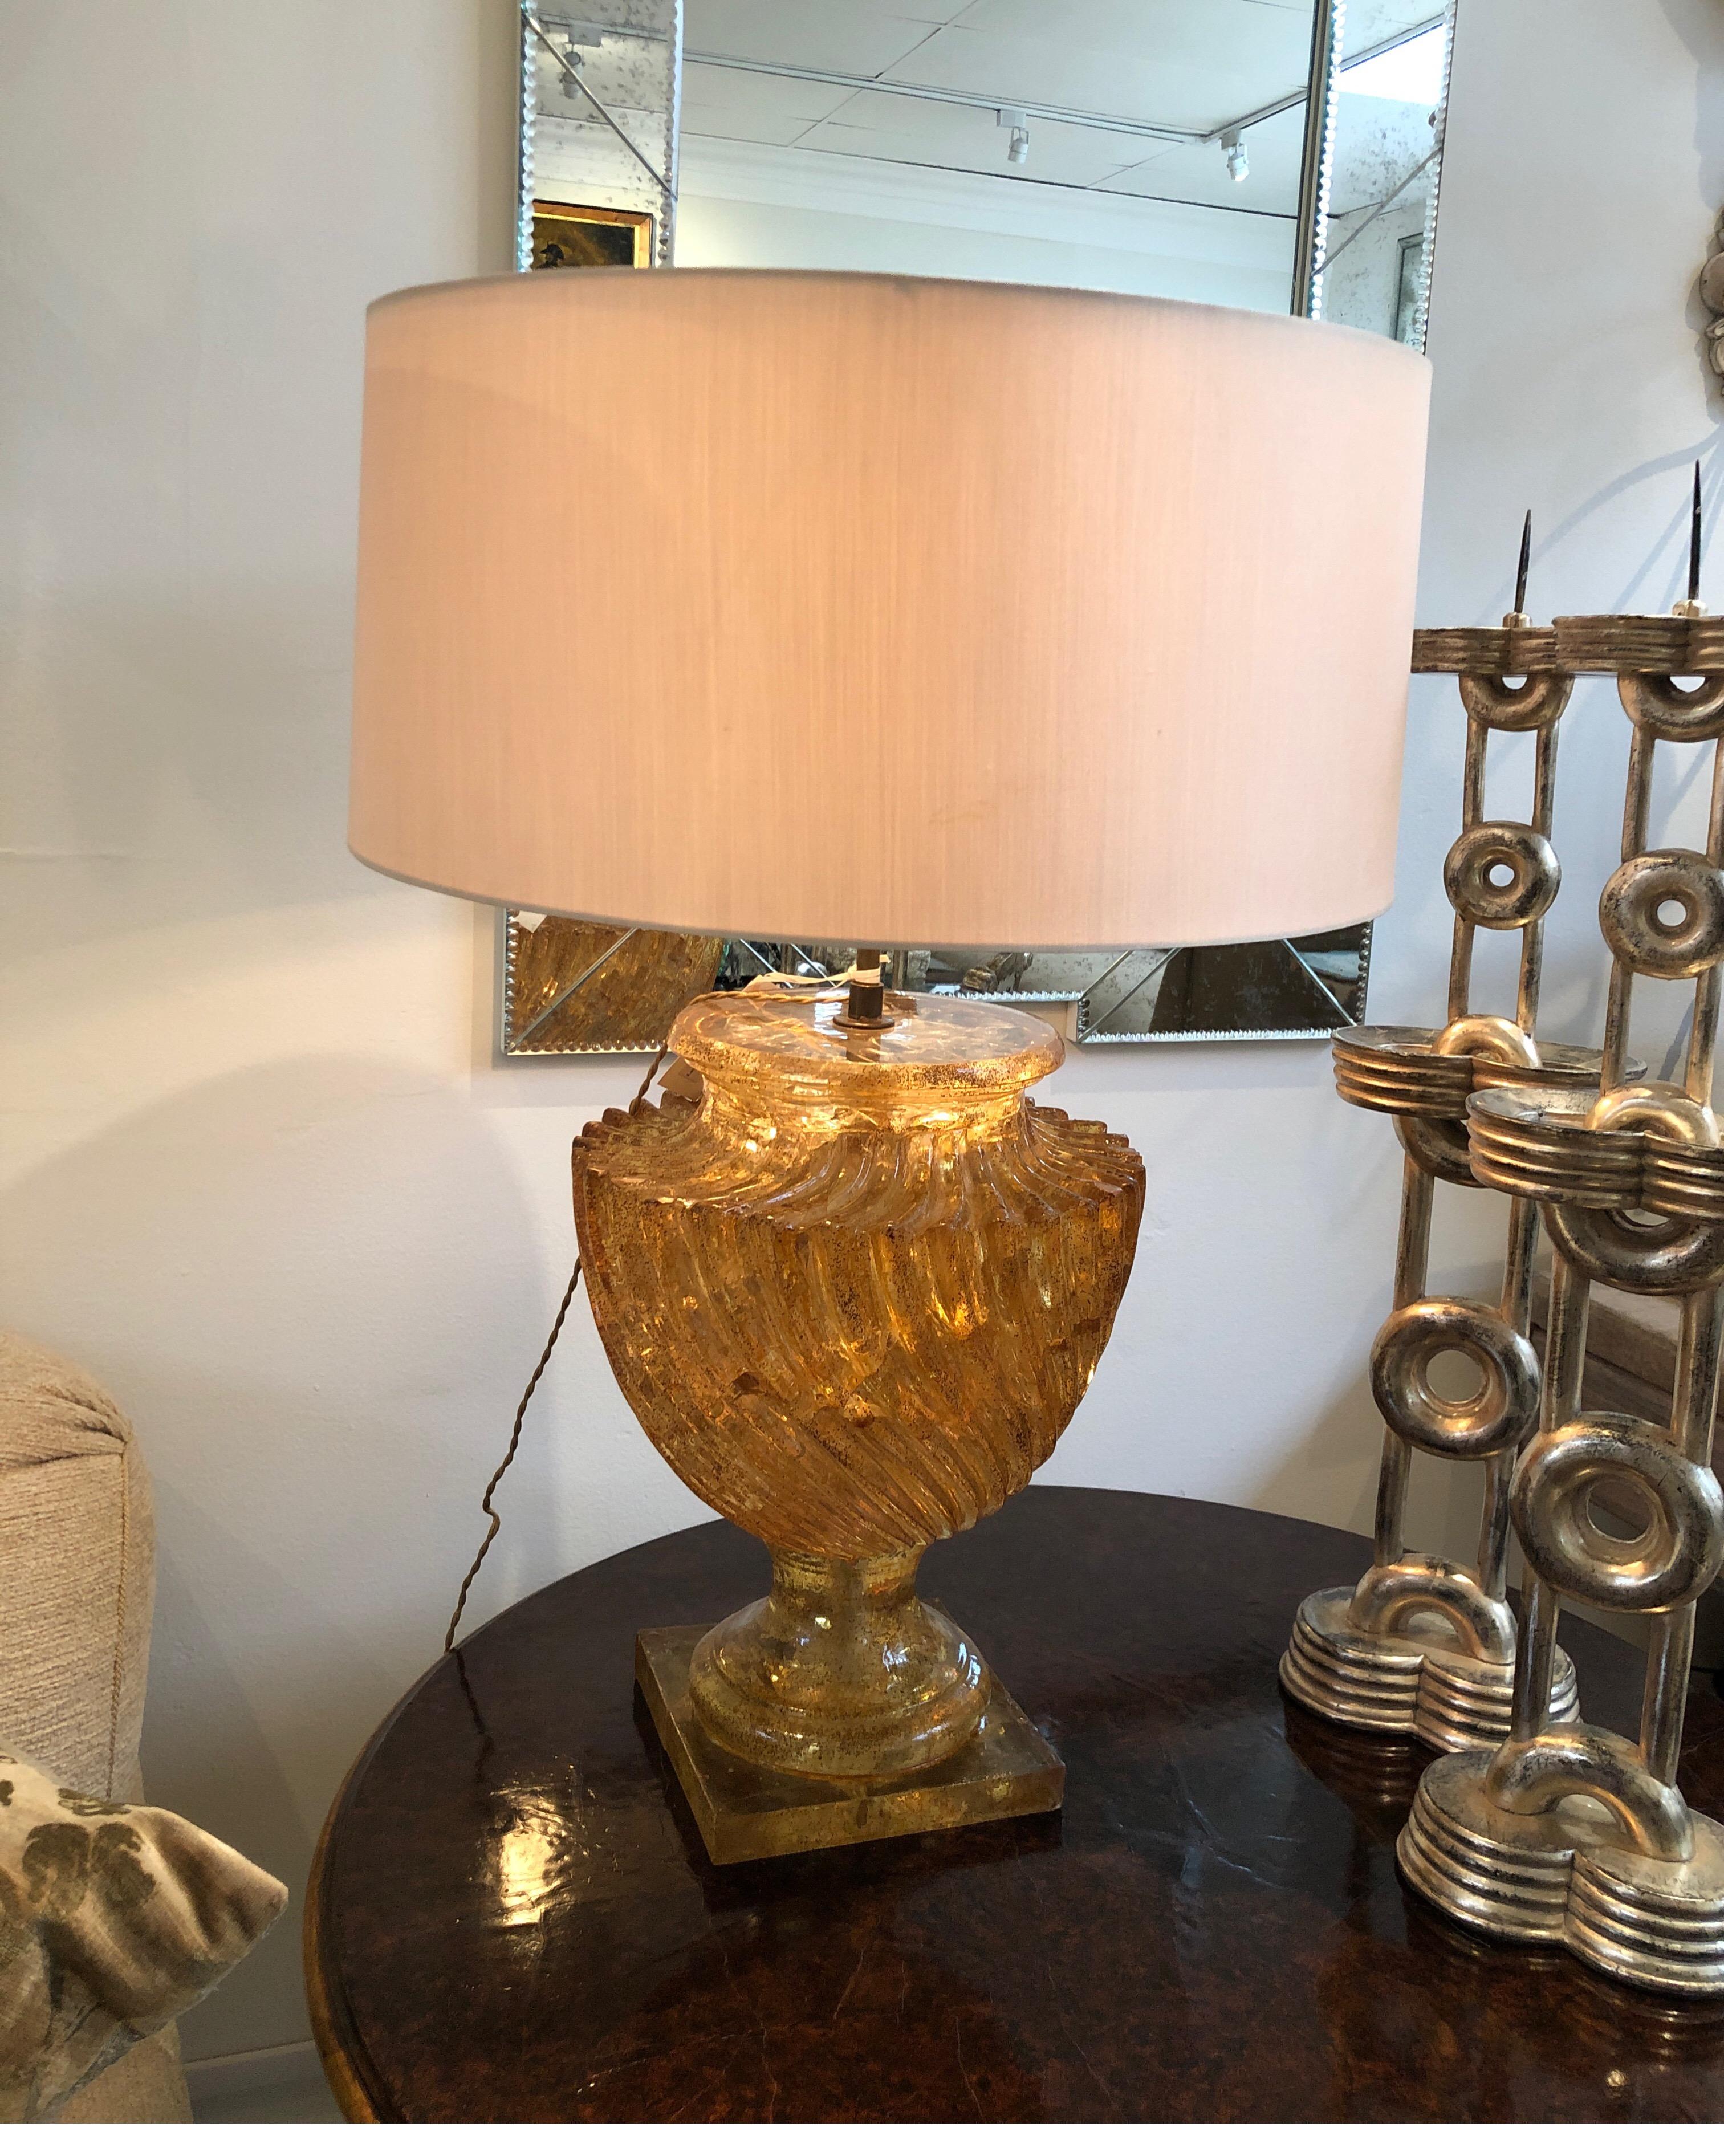 Very unique resin lamp with amber color. Twist carving and brass hardware.
Solid and heavy piece.

Measure: 30